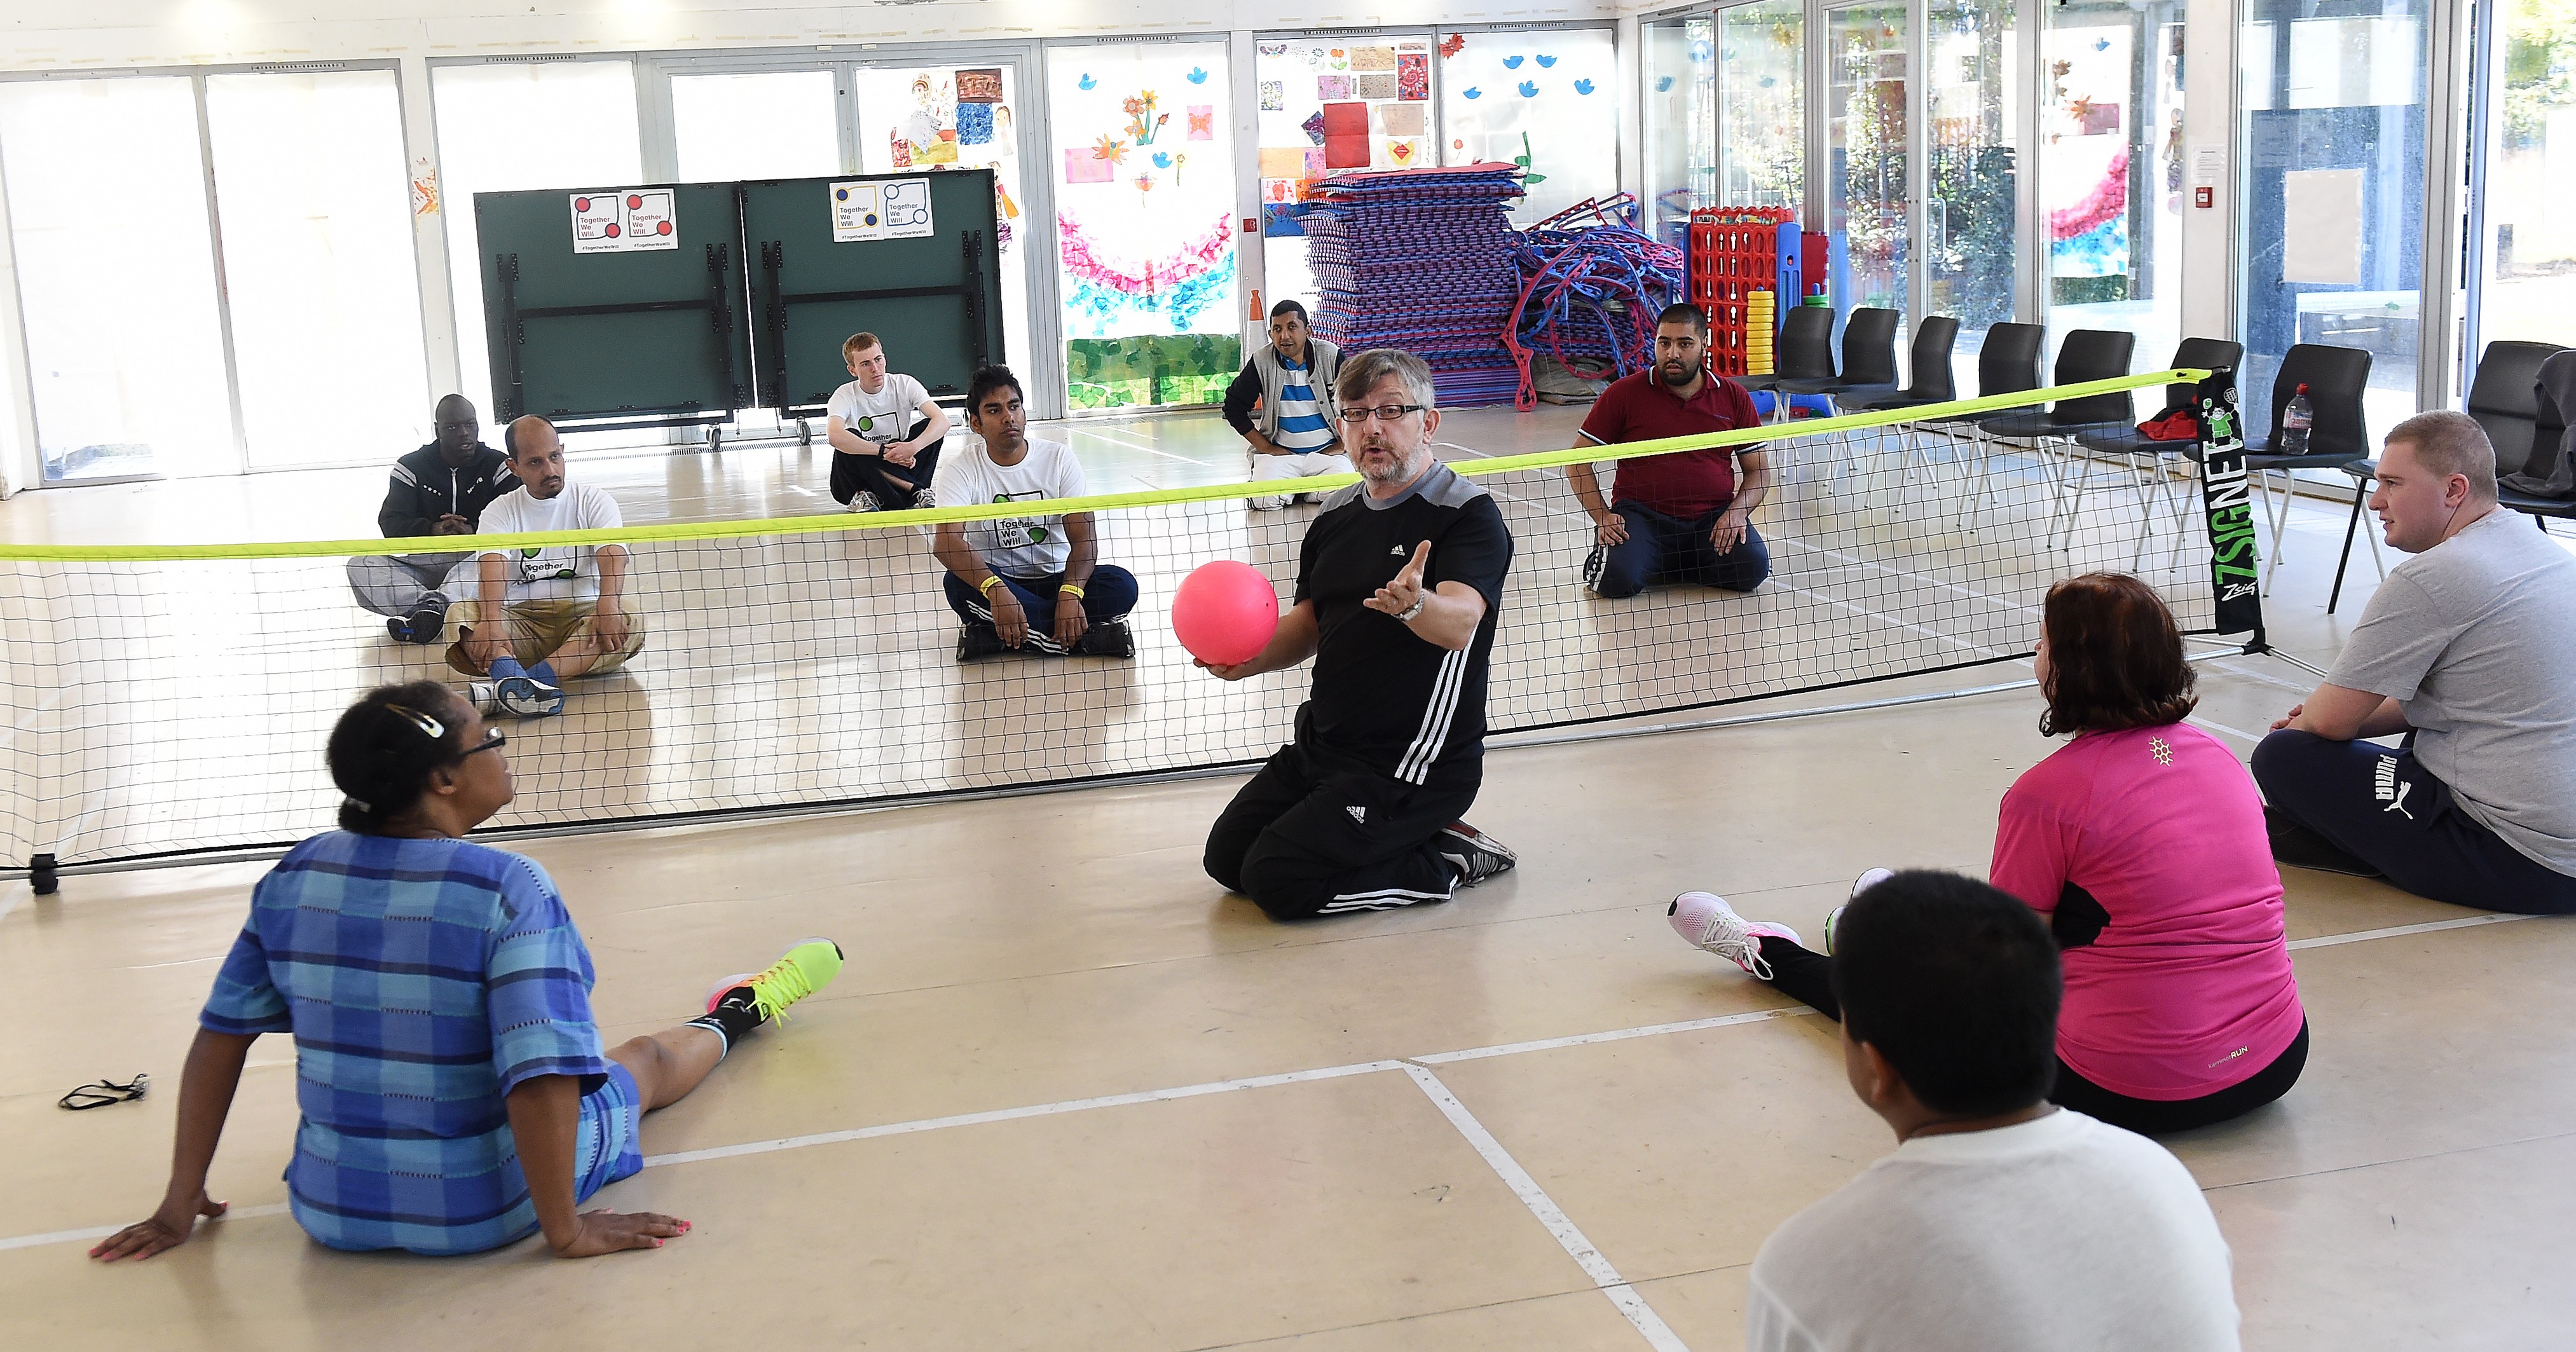 Group of disabled and non-disabled people playing sitting volleyball